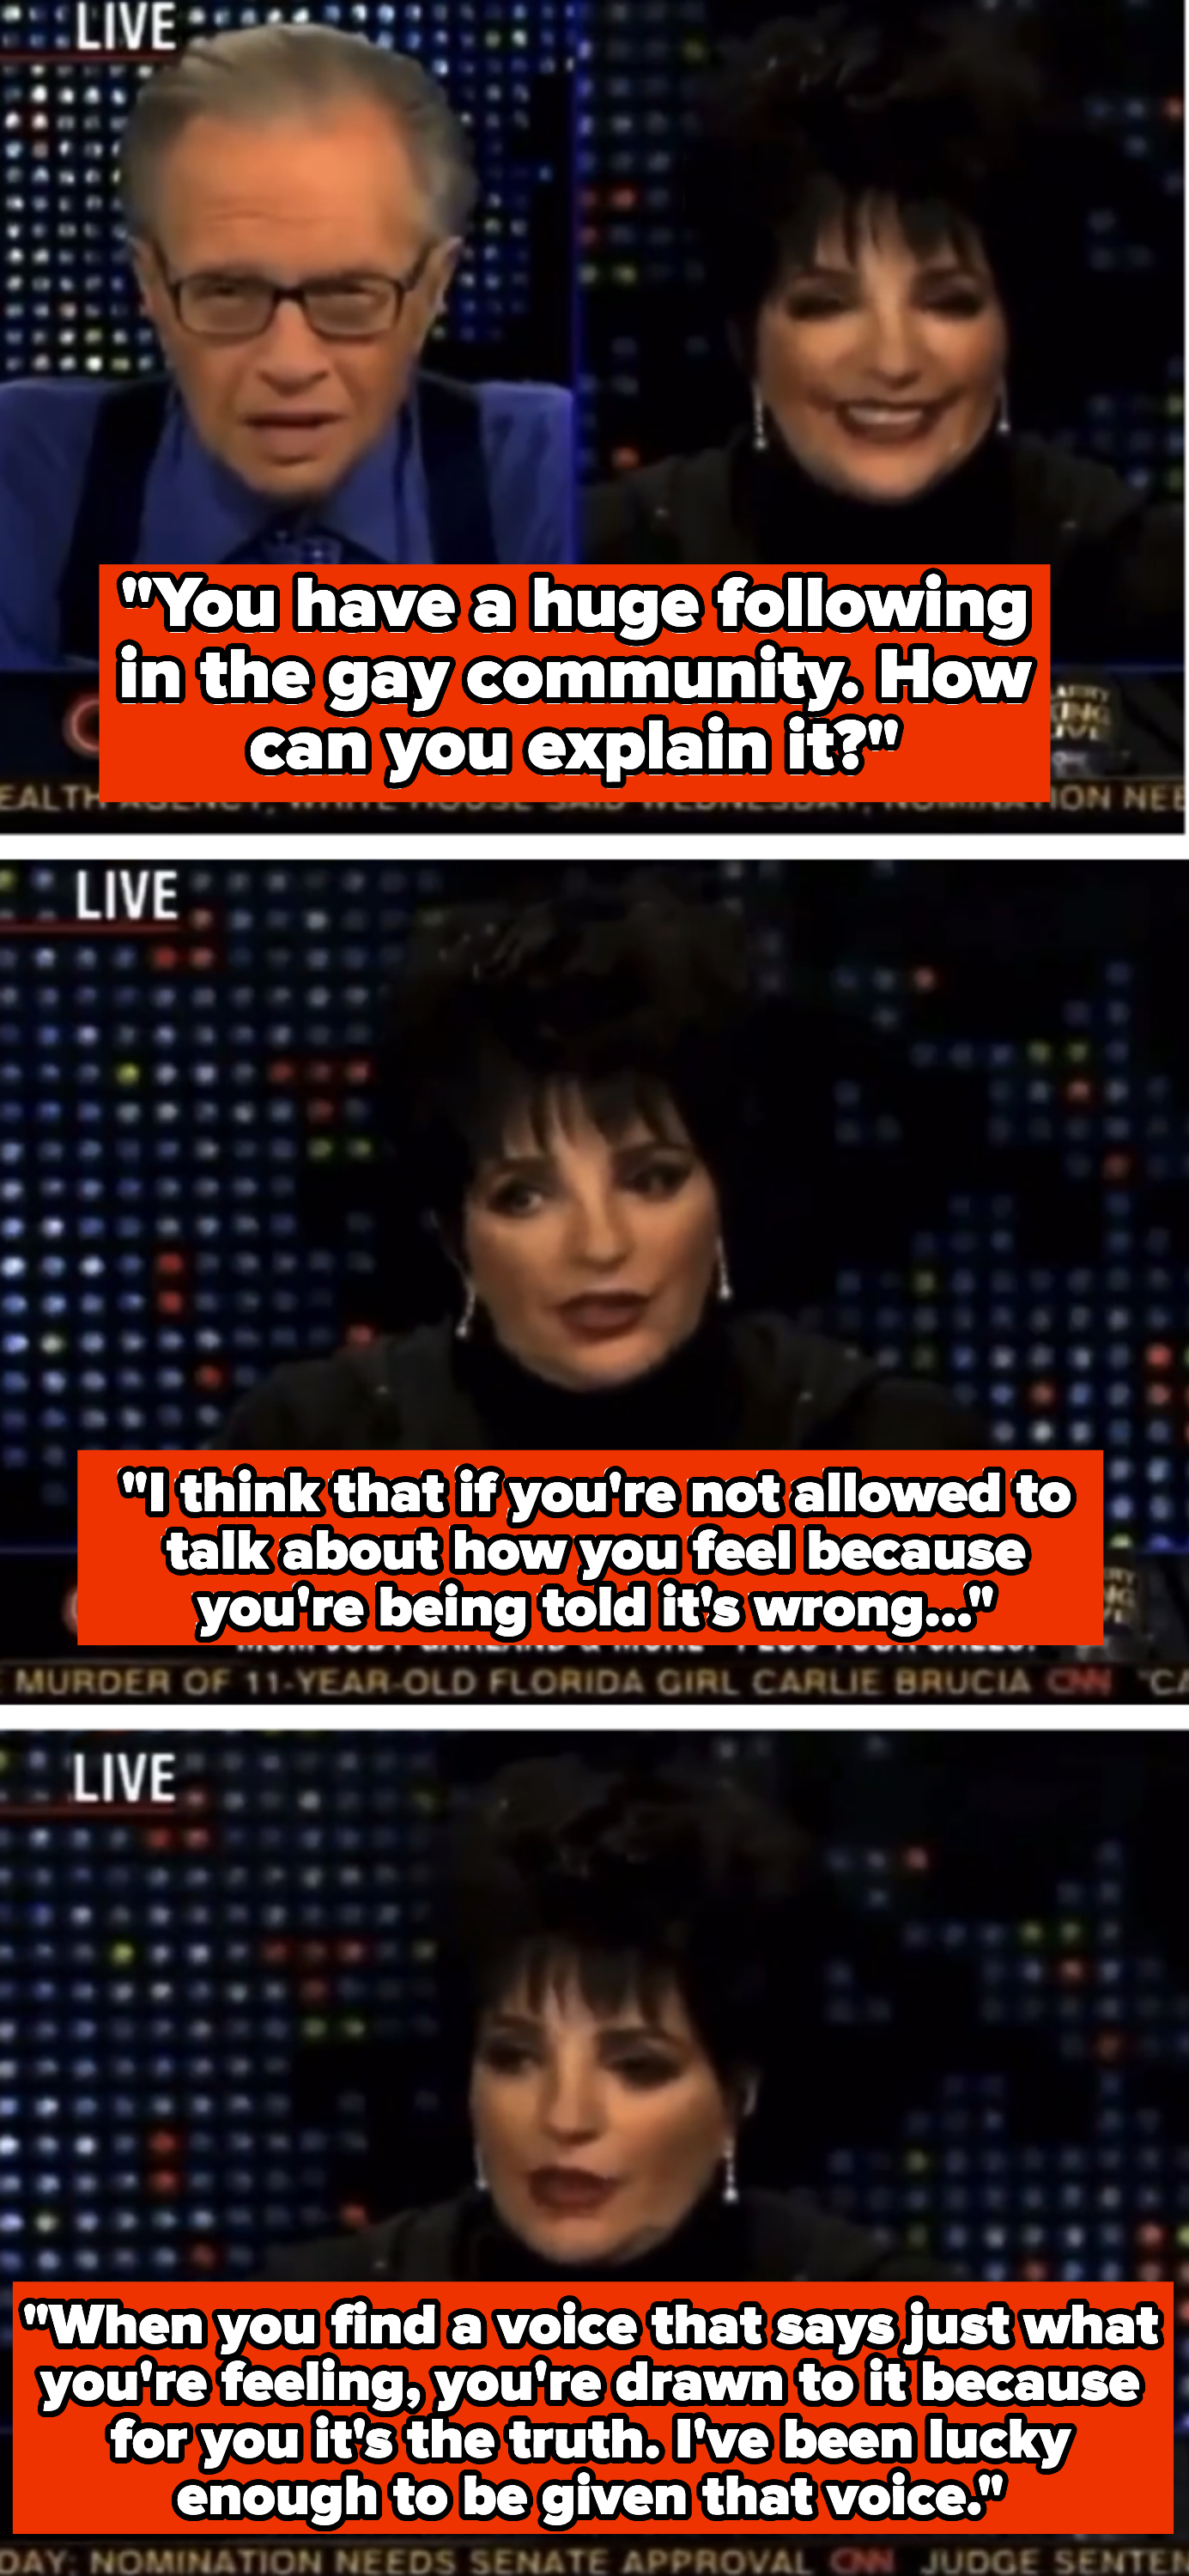 liza during an interview with larry king